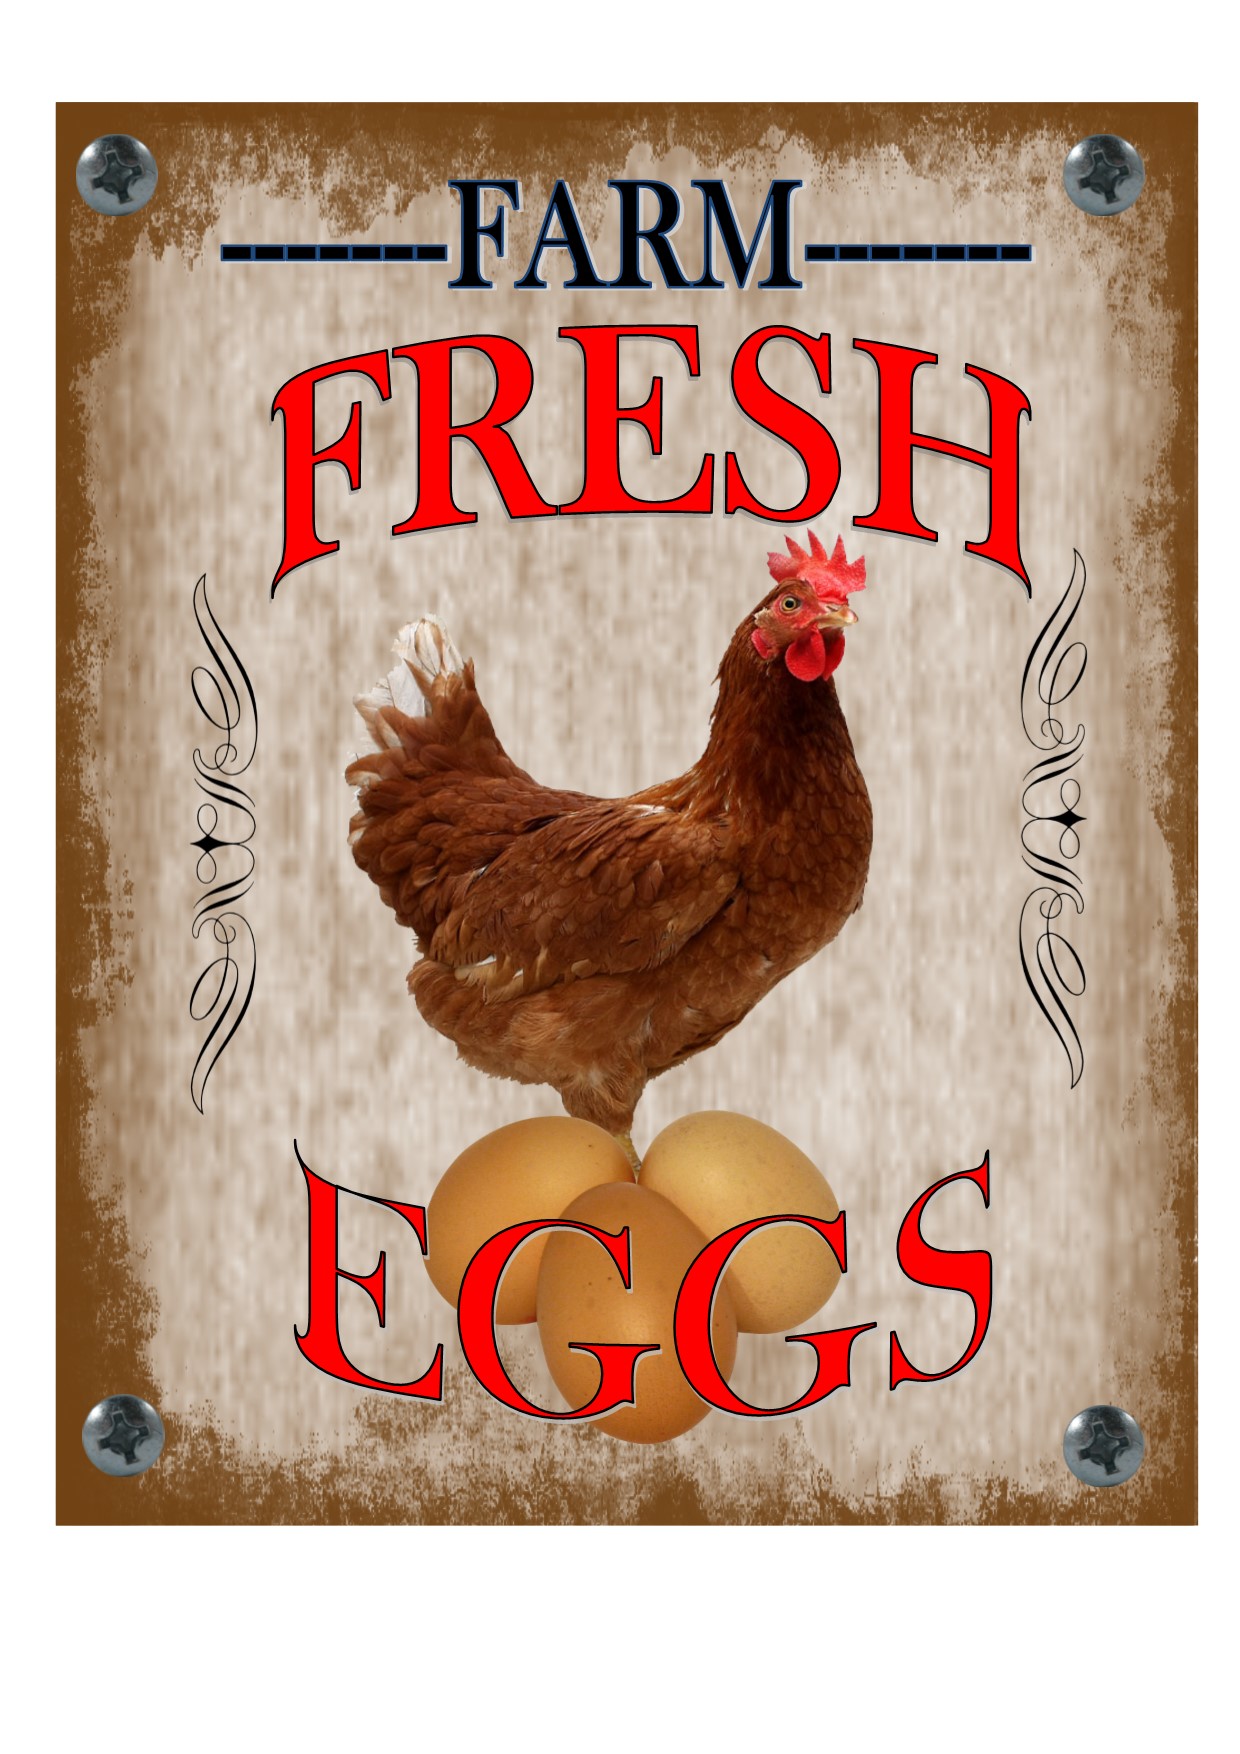 Farm Fresh Eggs Vintage Sign Reproduction Vintage Style Advertising